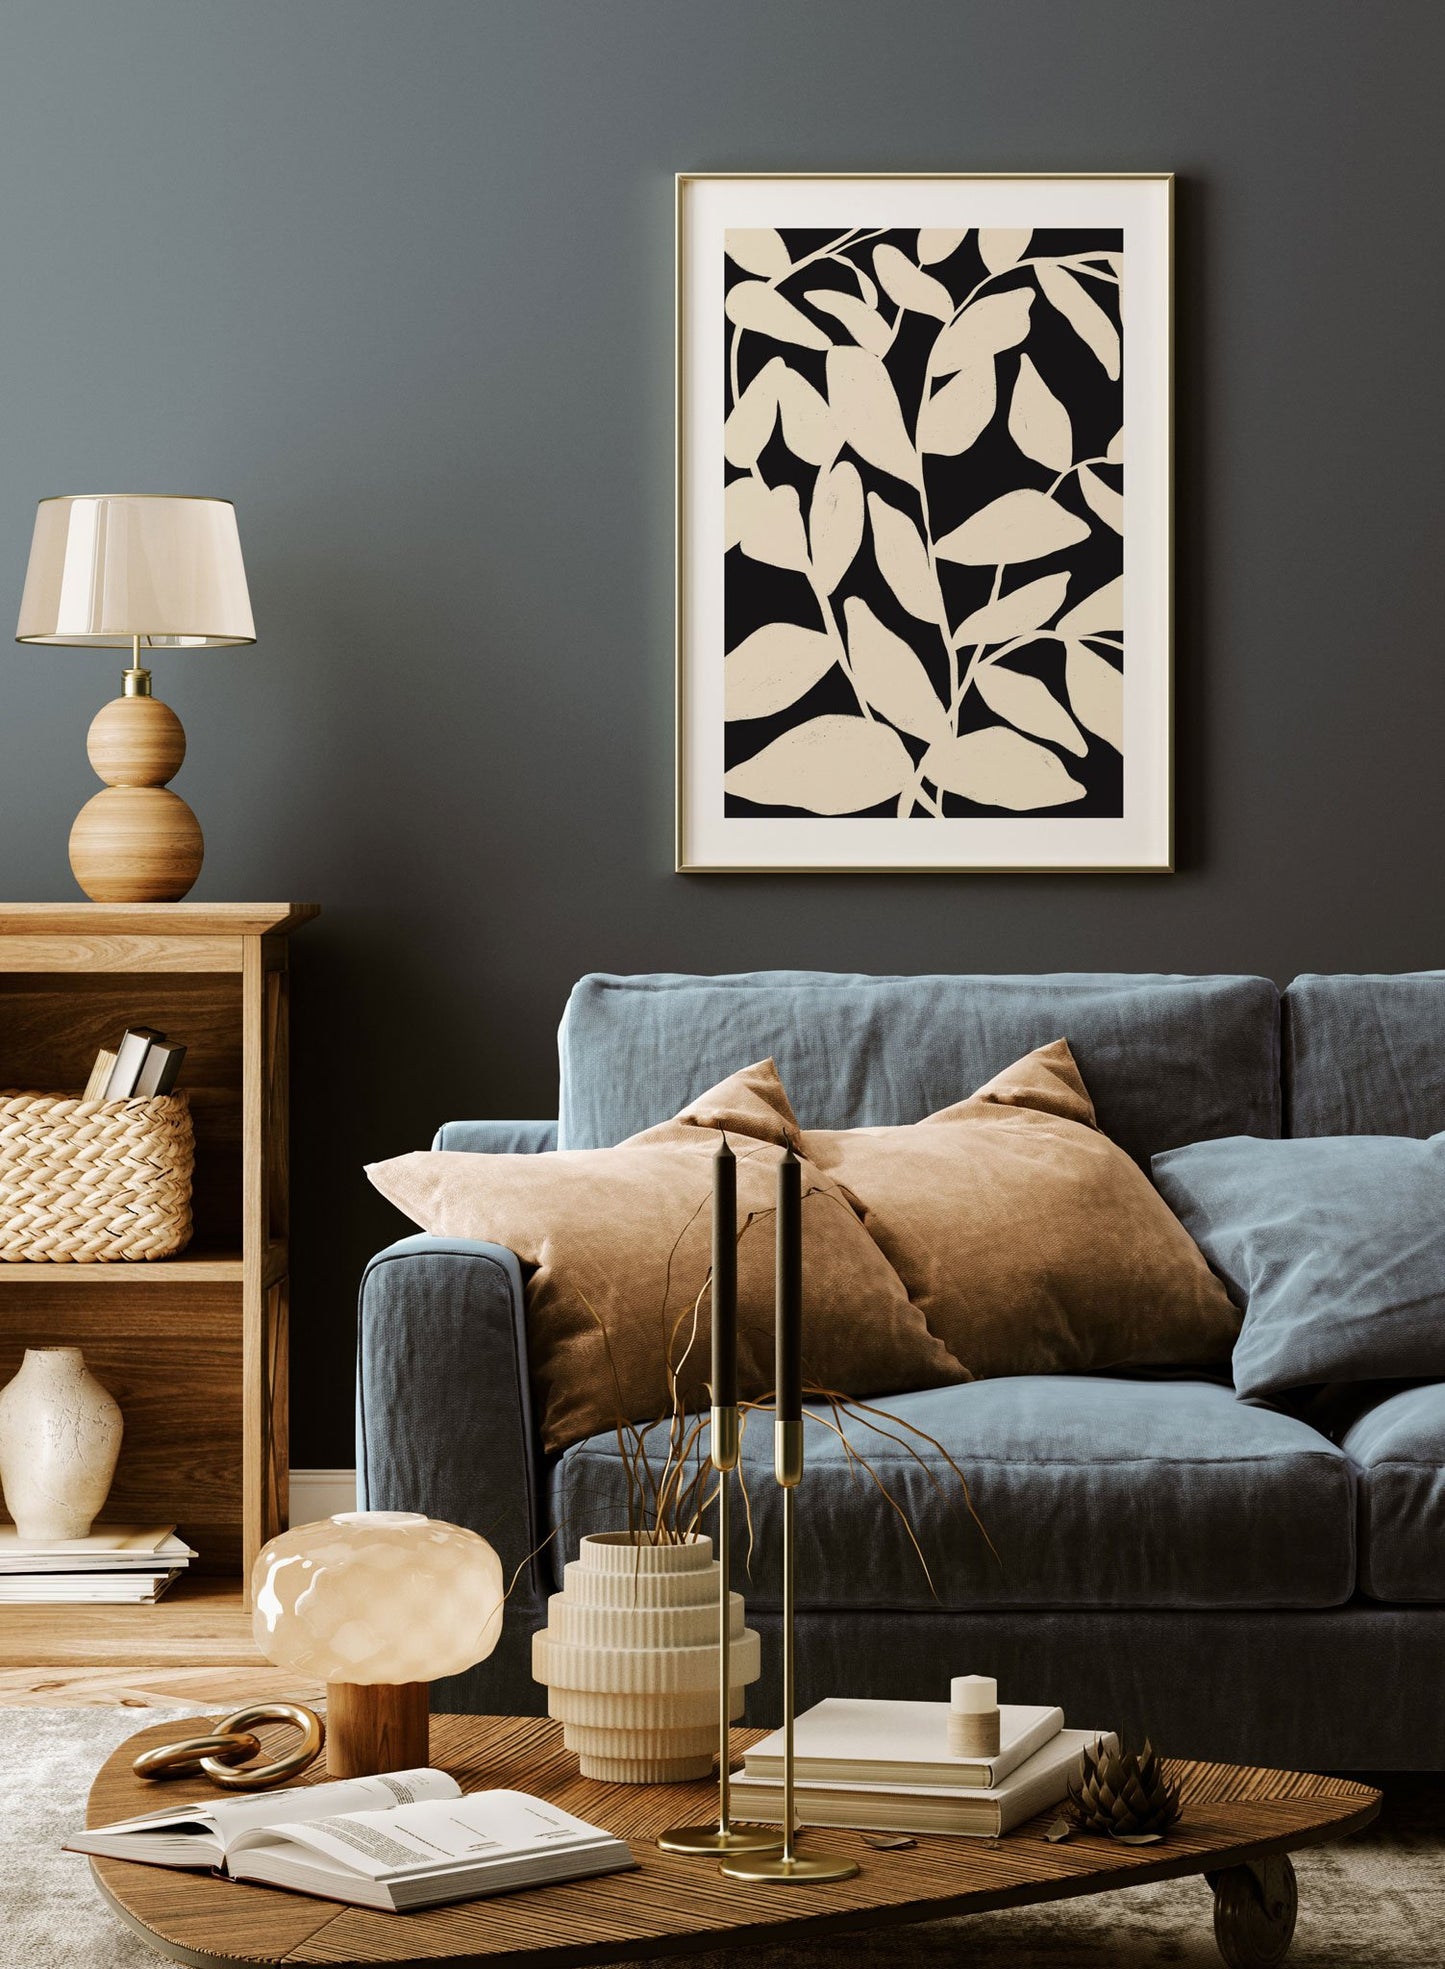 "Leaf Choreography" is a minimalist illustration poster by Opposite Wall in black and beige of abstract beige leaves entangled over a black background inspired by French painter Henri Matisse.